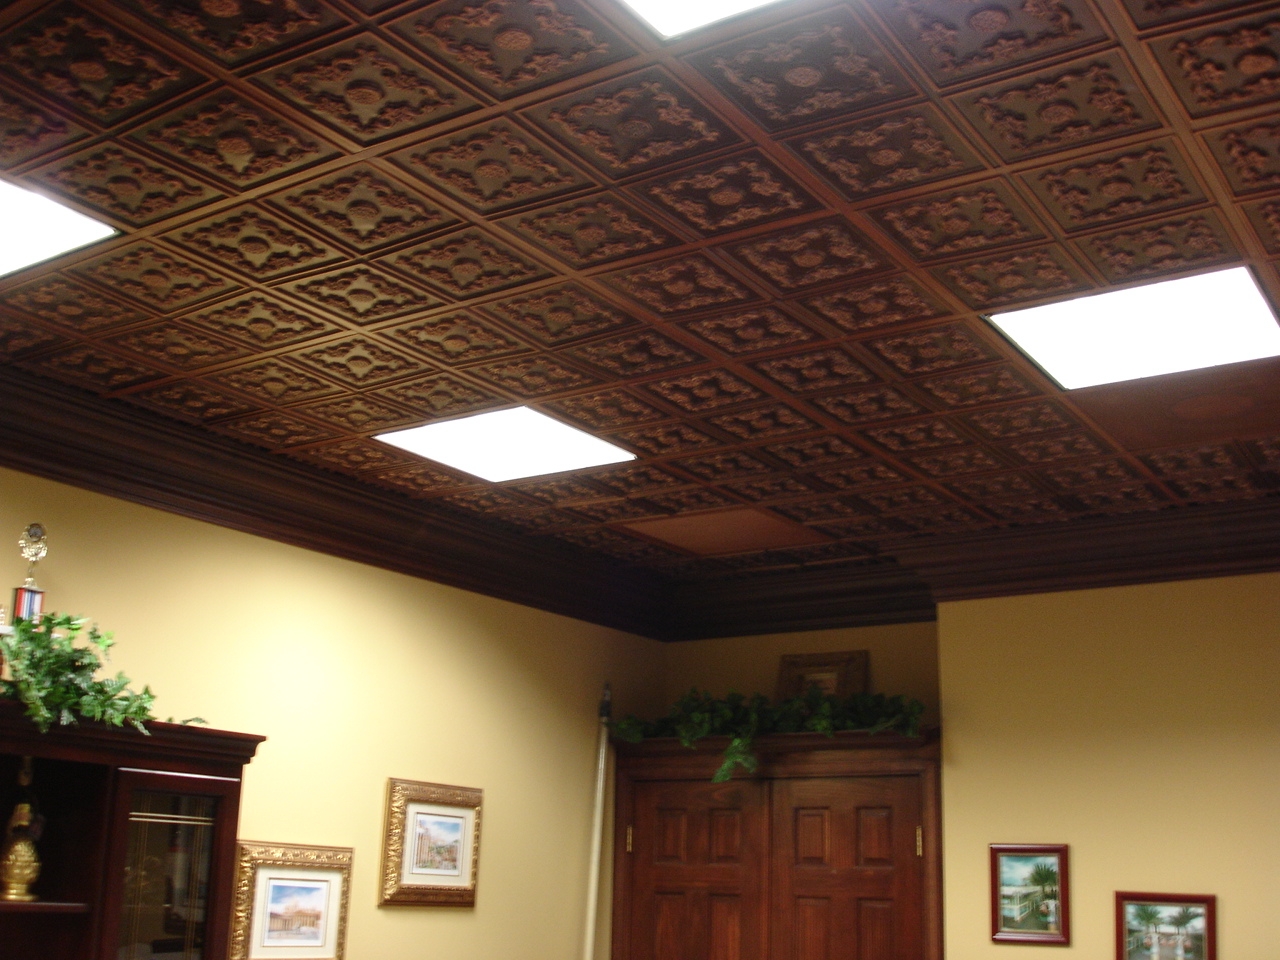 Plastic Drop Ceiling Tiles Look Like Tinle chateau faux tin ceiling tile glue up 24x24 130